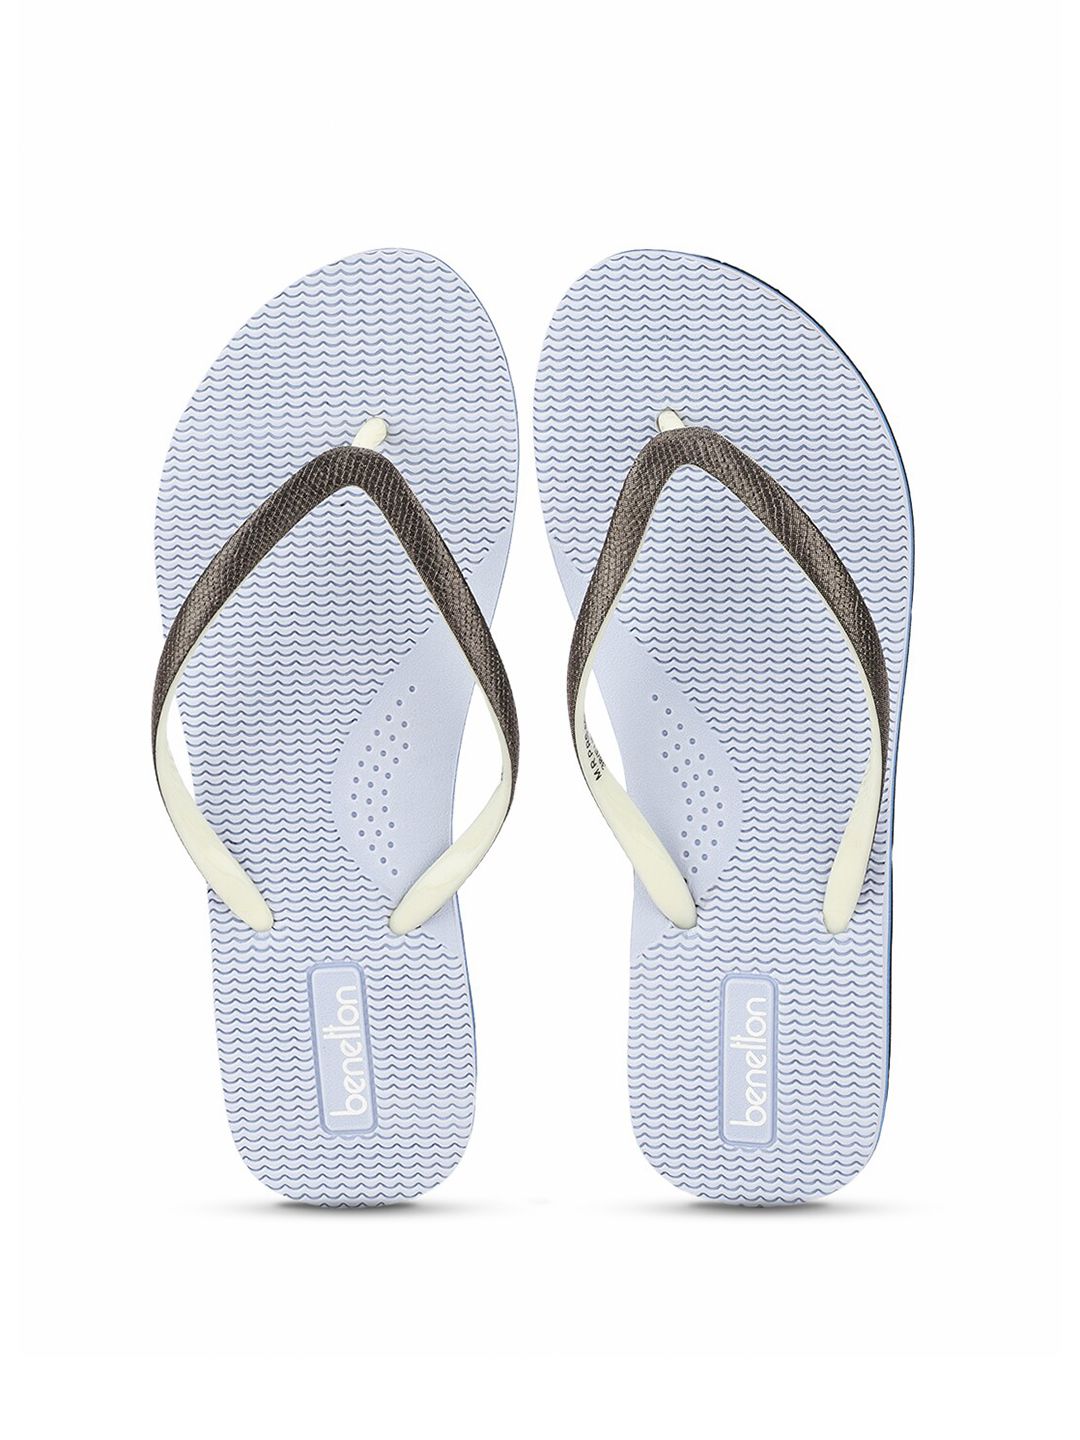 United Colors of Benetton Women Blue Rubber Thong Flip-Flops Price in India